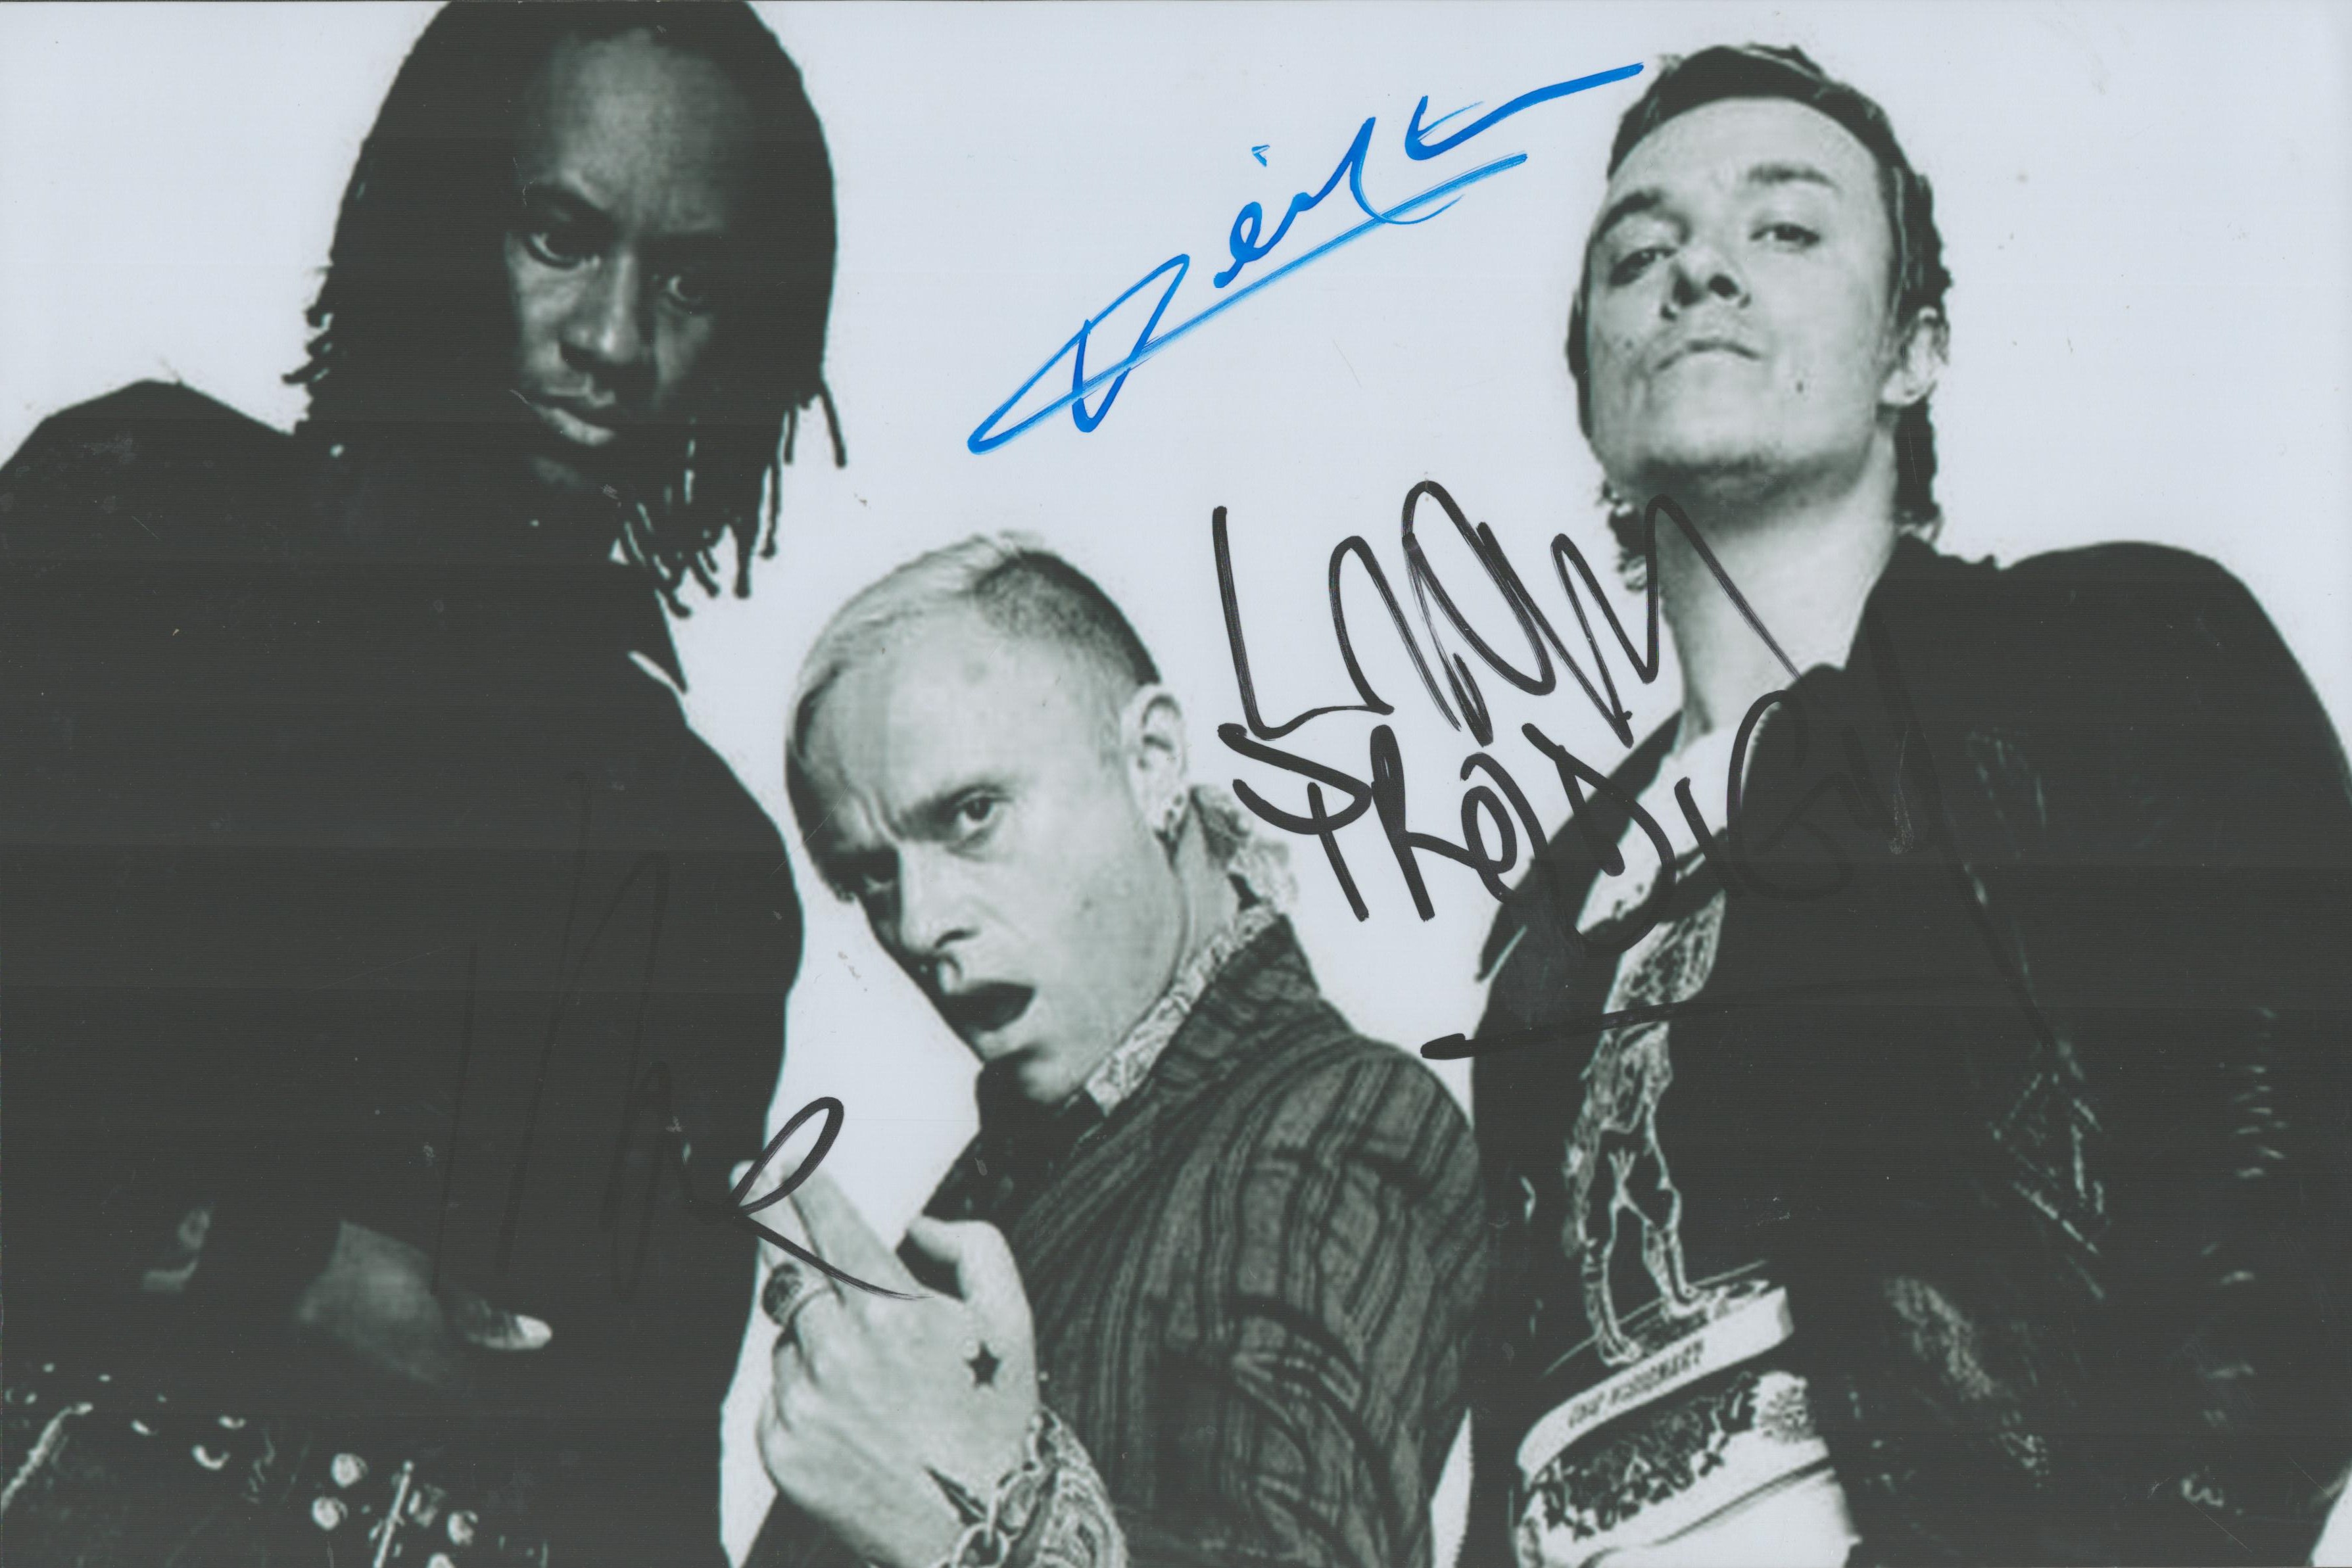 Prodigy signed 12x8inch black and white photo. Signed by all 3. Good condition. All autographs are